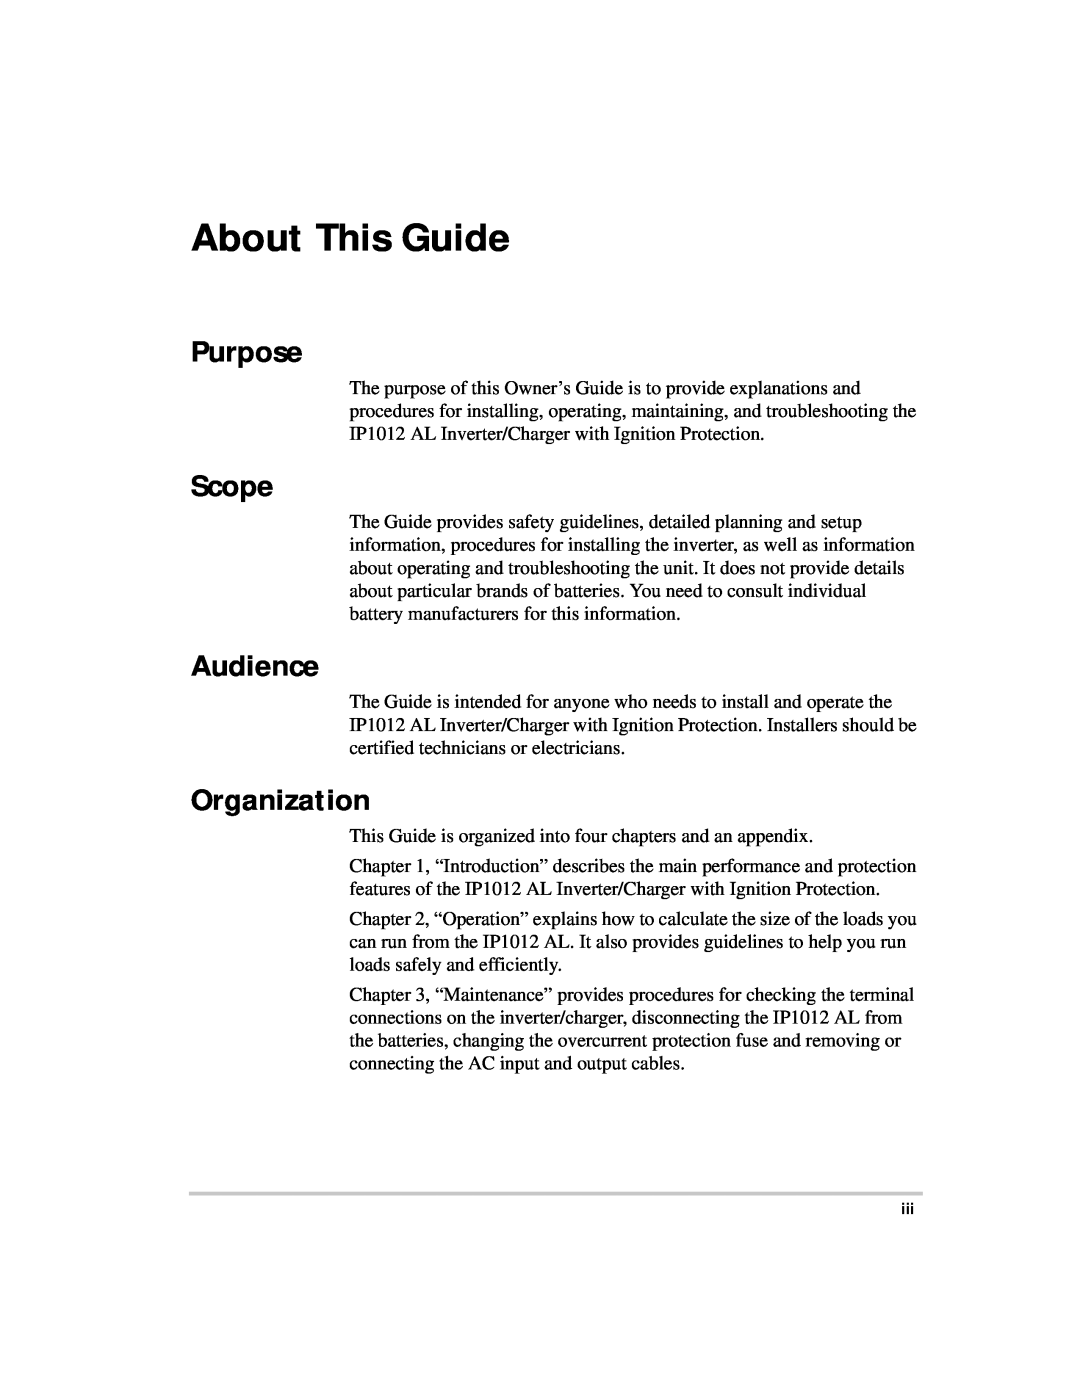 Xantrex Technology IP1012 AL manual About This Guide, Purpose, Scope, Audience, Organization 